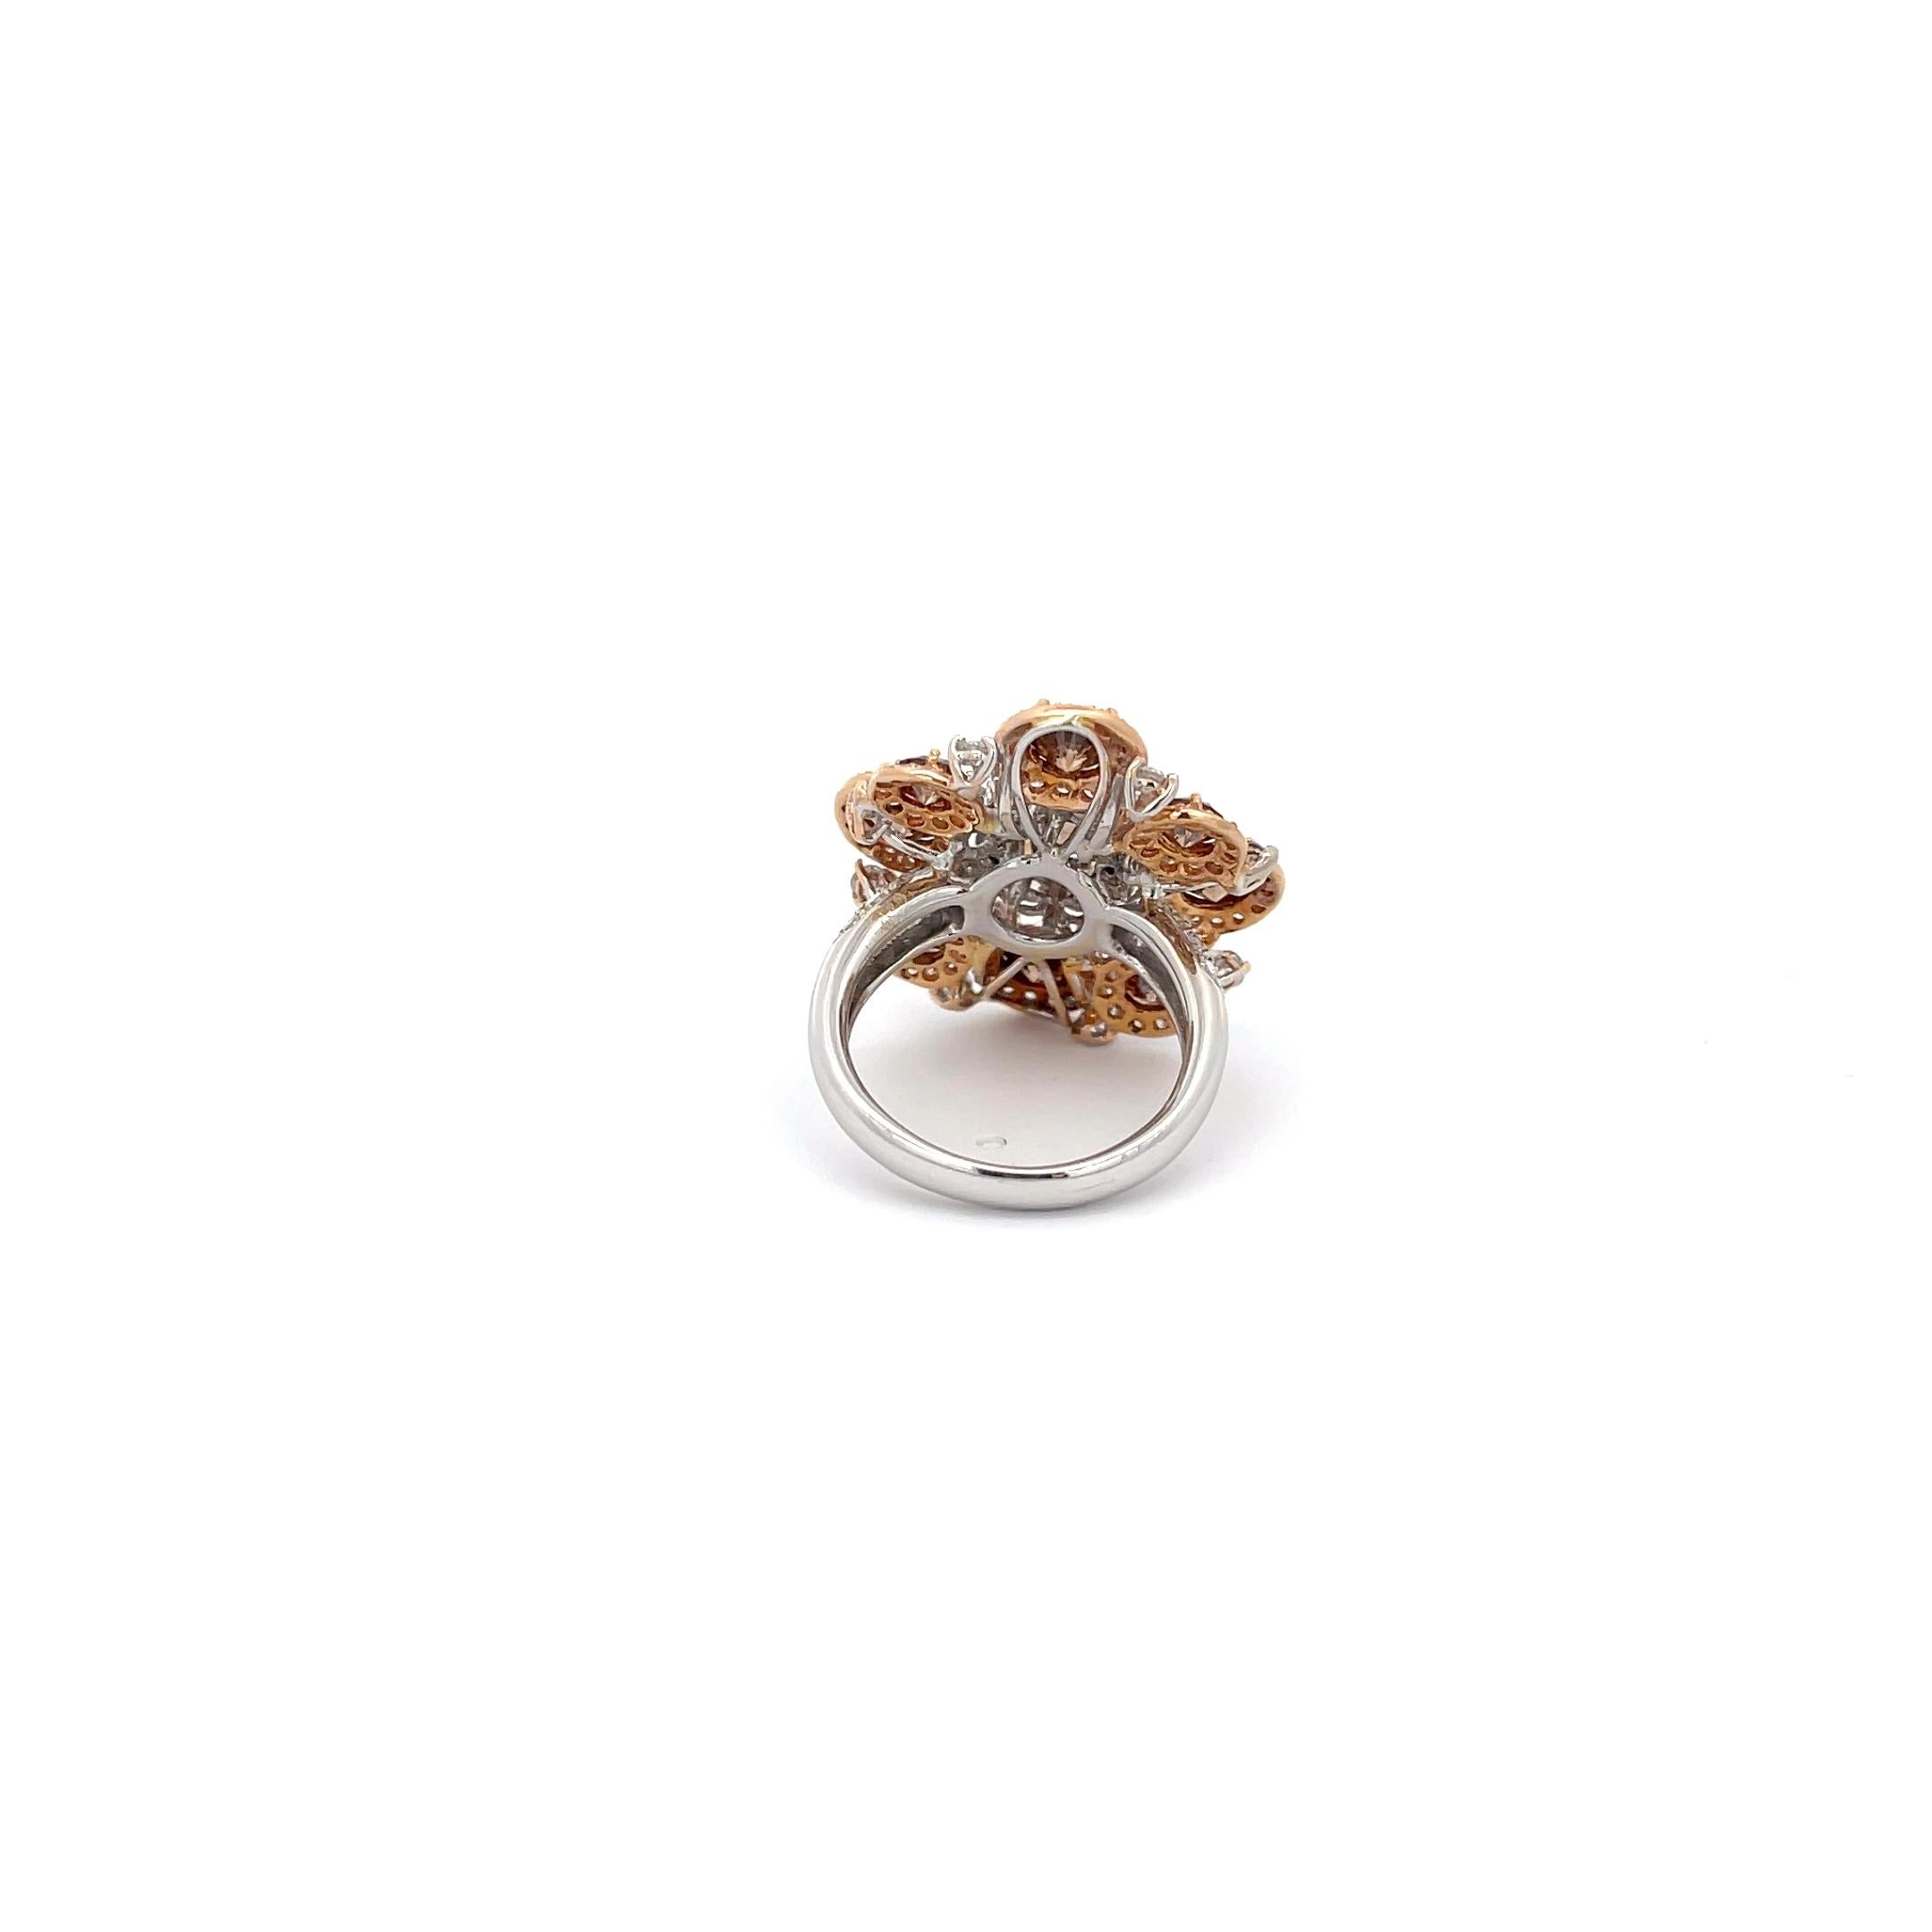 Cognac & White Diamond '5.50ctw' Flower Ring 18K Rose/White Gold In Excellent Condition For Sale In Dallas, TX